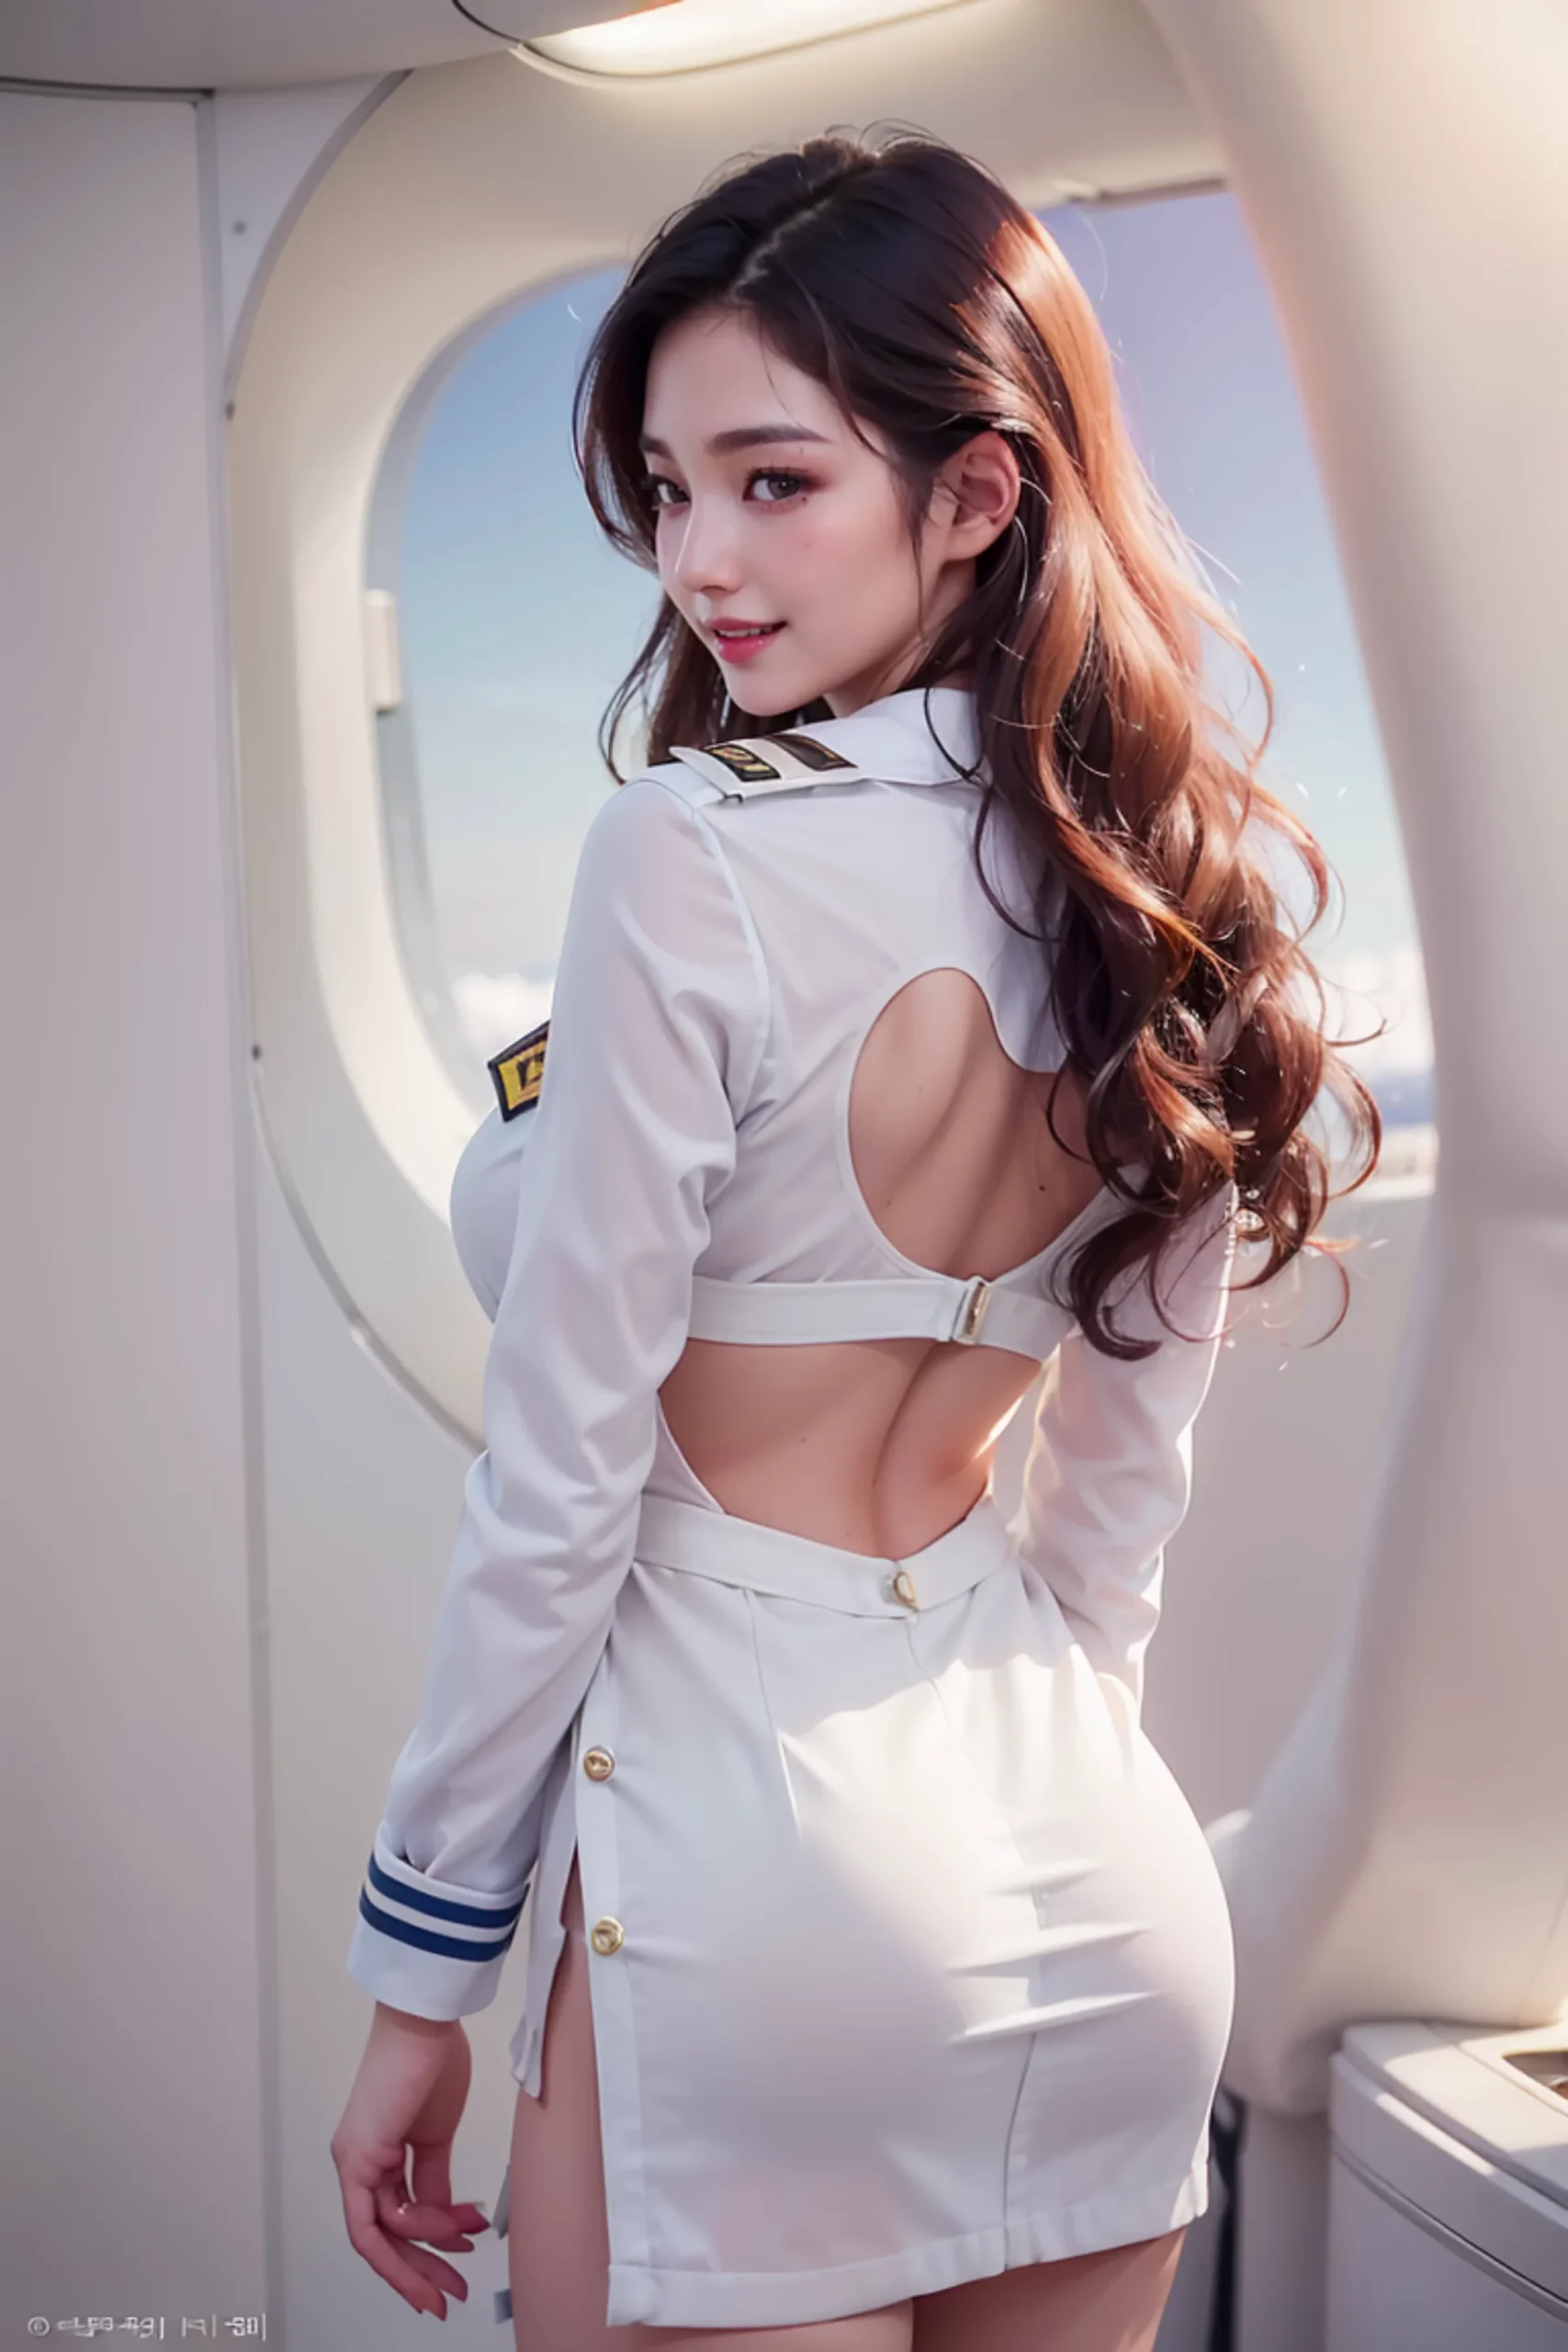 Sexy Flight Attendant Cosplay Vol. 2 Images 17